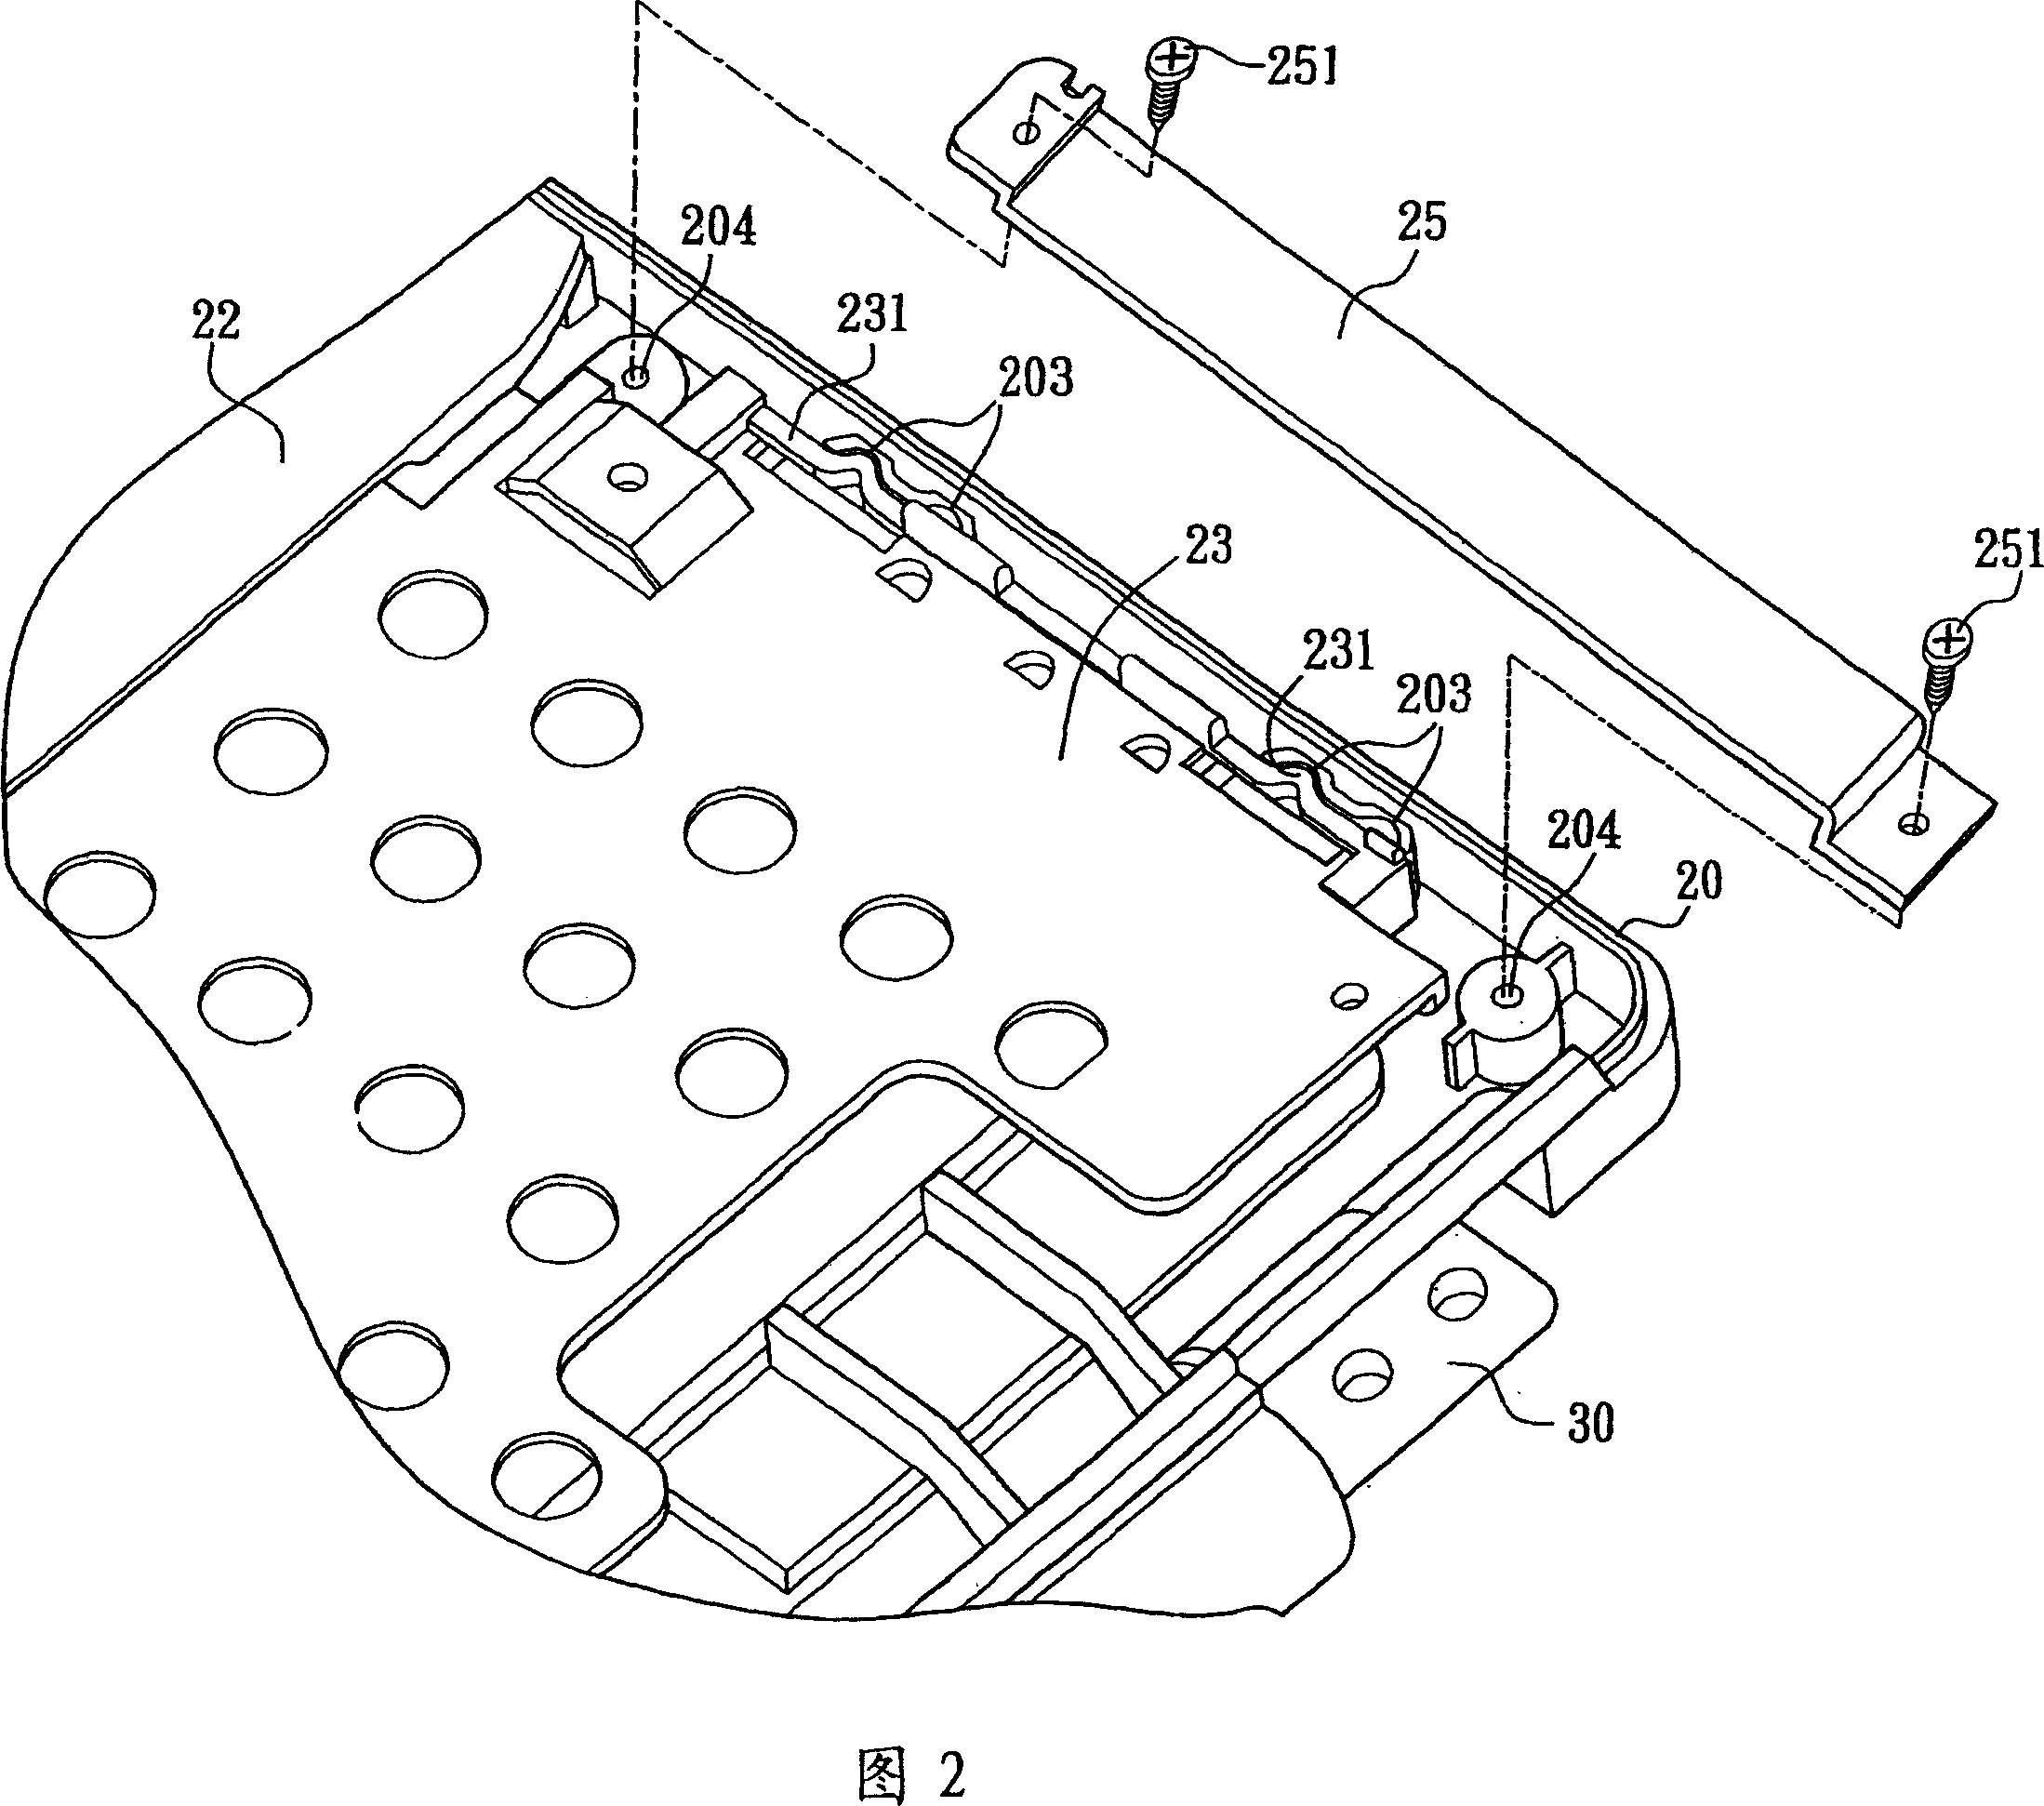 Electronic device capable of changing panel of case